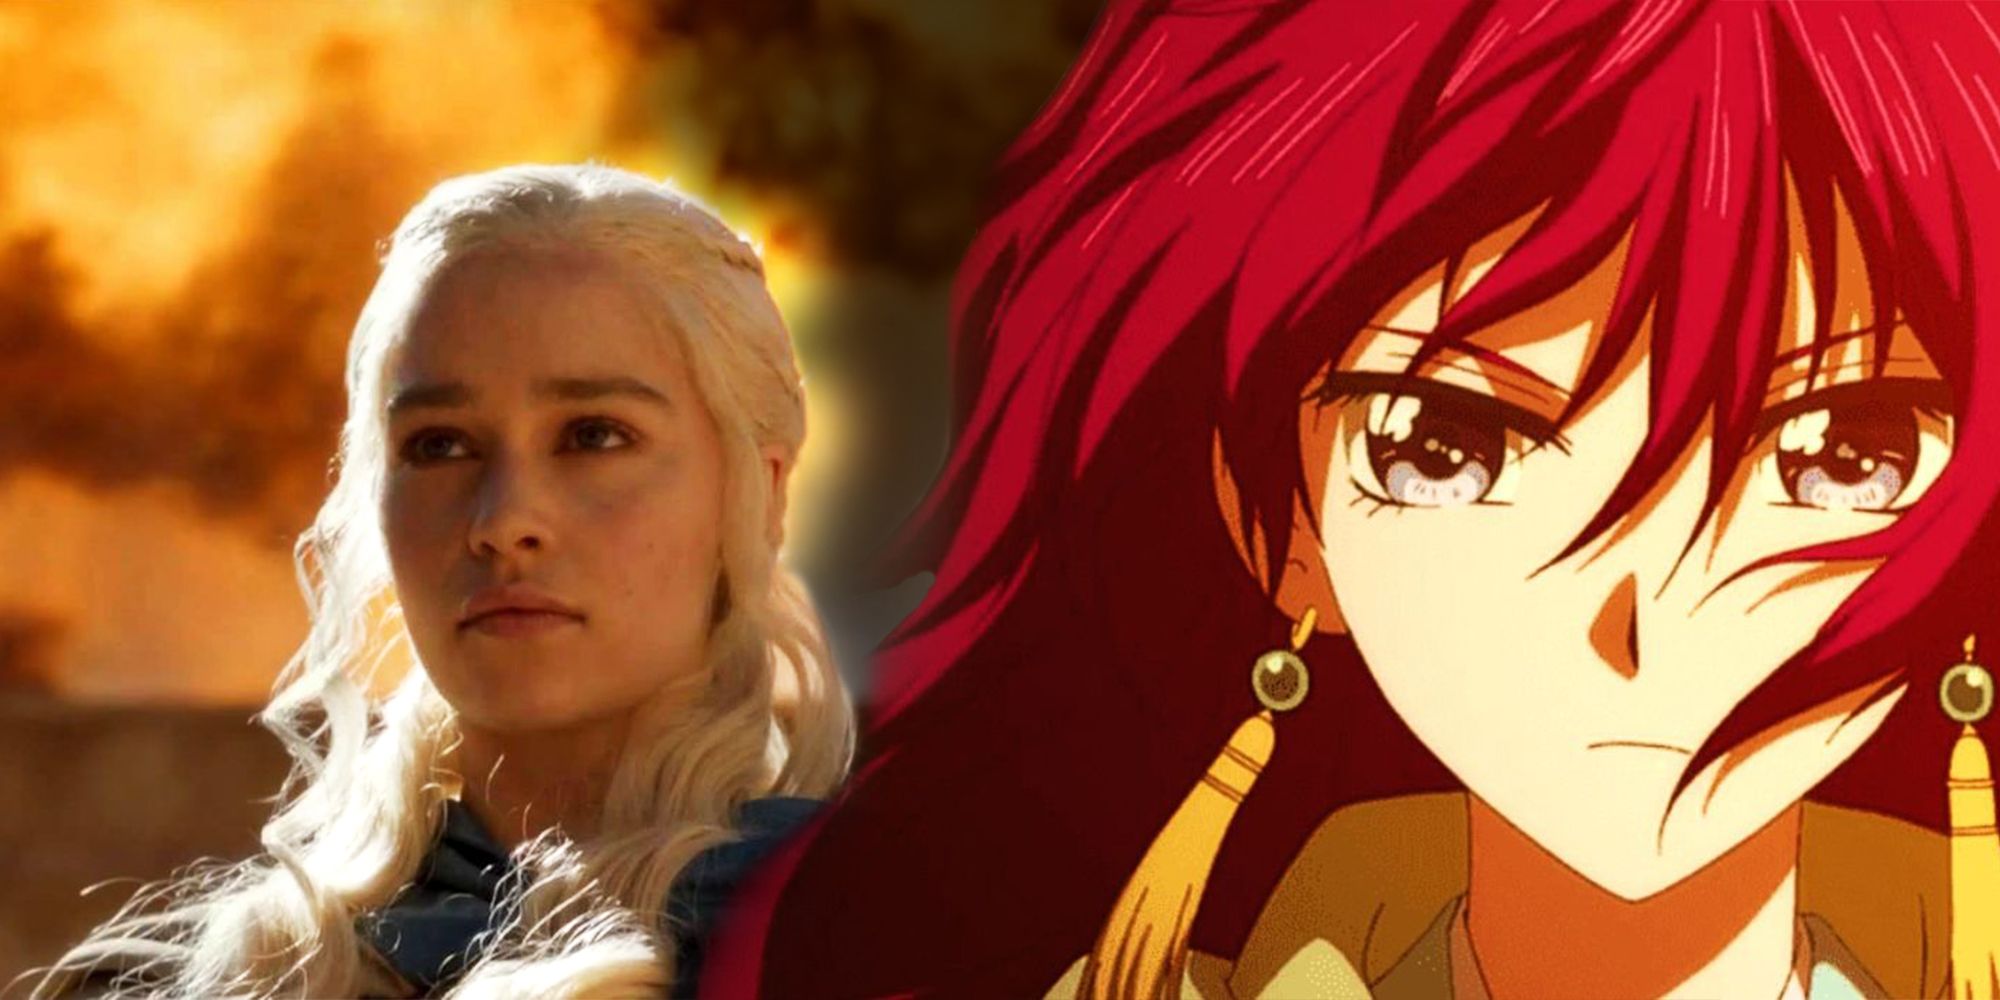 snap of daenerys from GoT and Yona from Yona of the Dawn